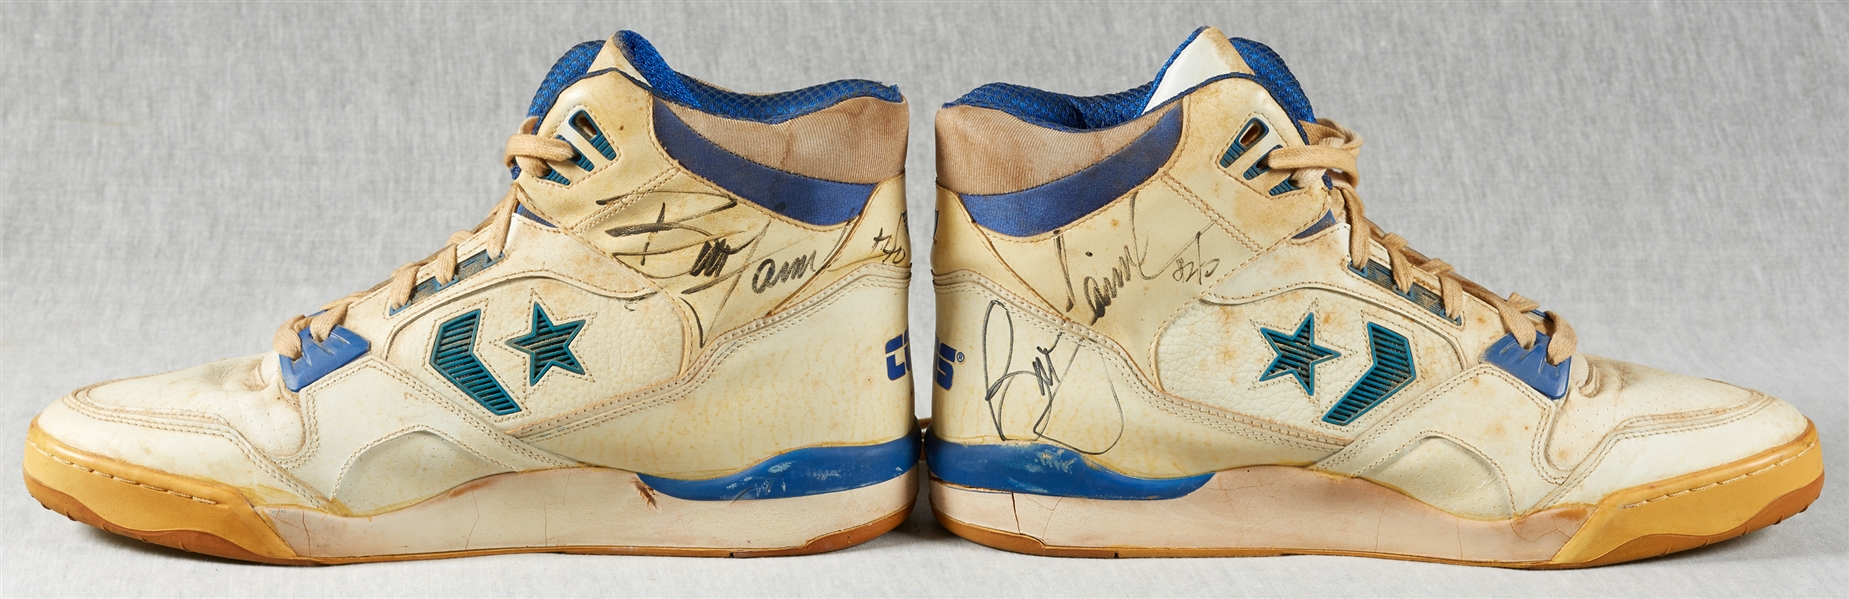 Bill Laimbeer Game-Used & Signed Shoes Pair (2) (BAS)